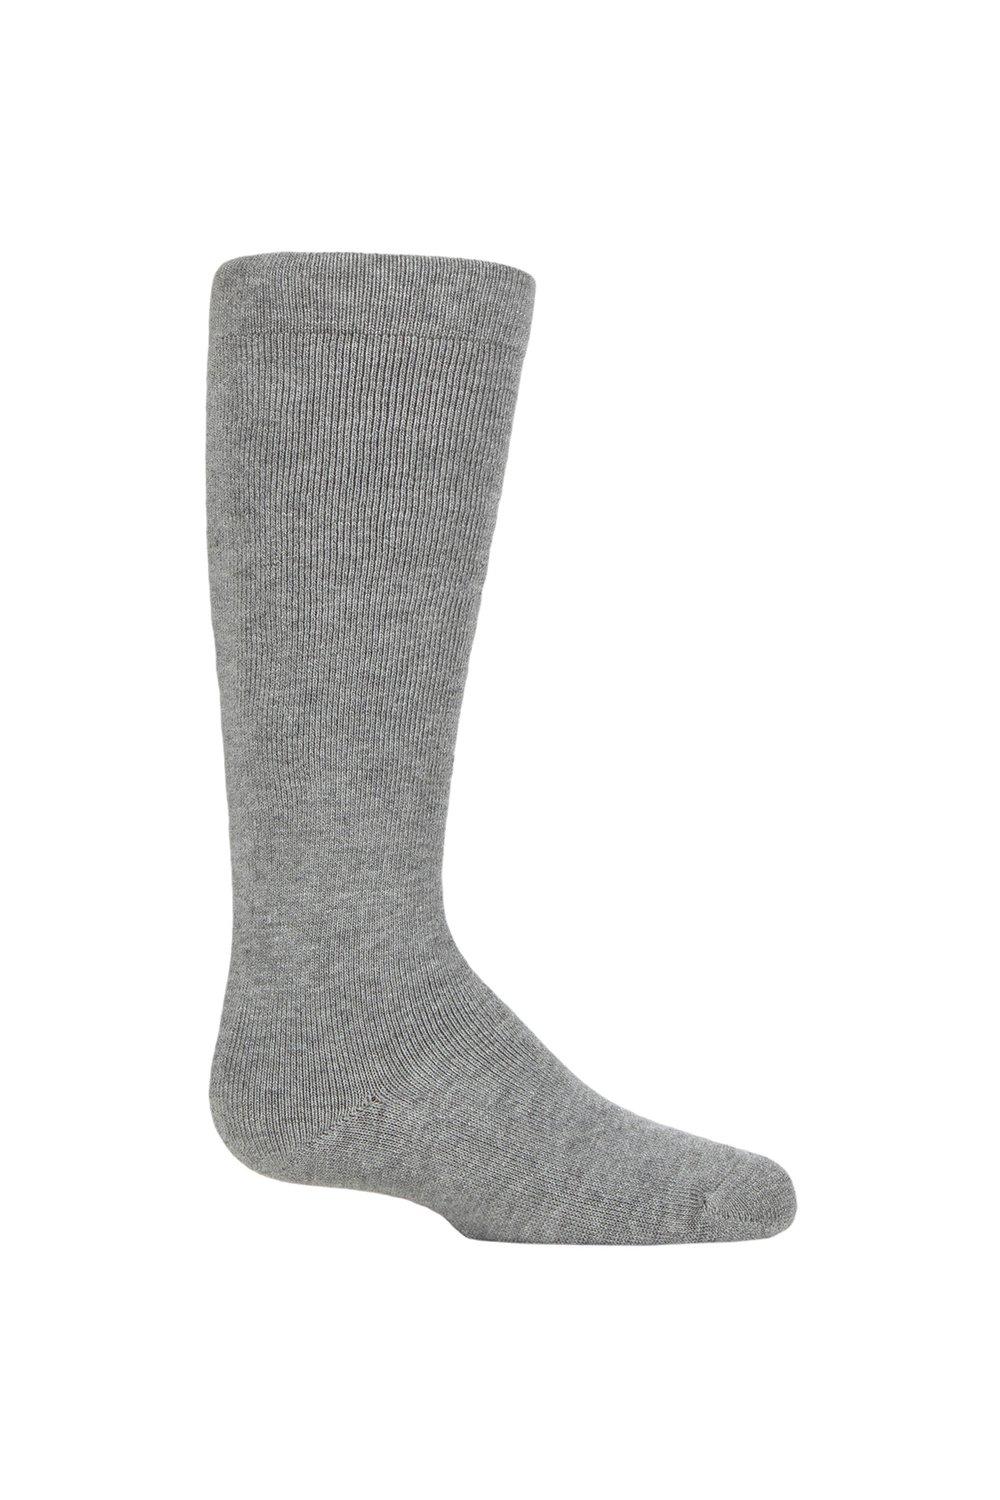 Boys and Girls 1 Pair SOCKSHOP Plain Wellyboot Full Cushion Bamboo Socks with Comfort Cuff and Smooth Toe Seams